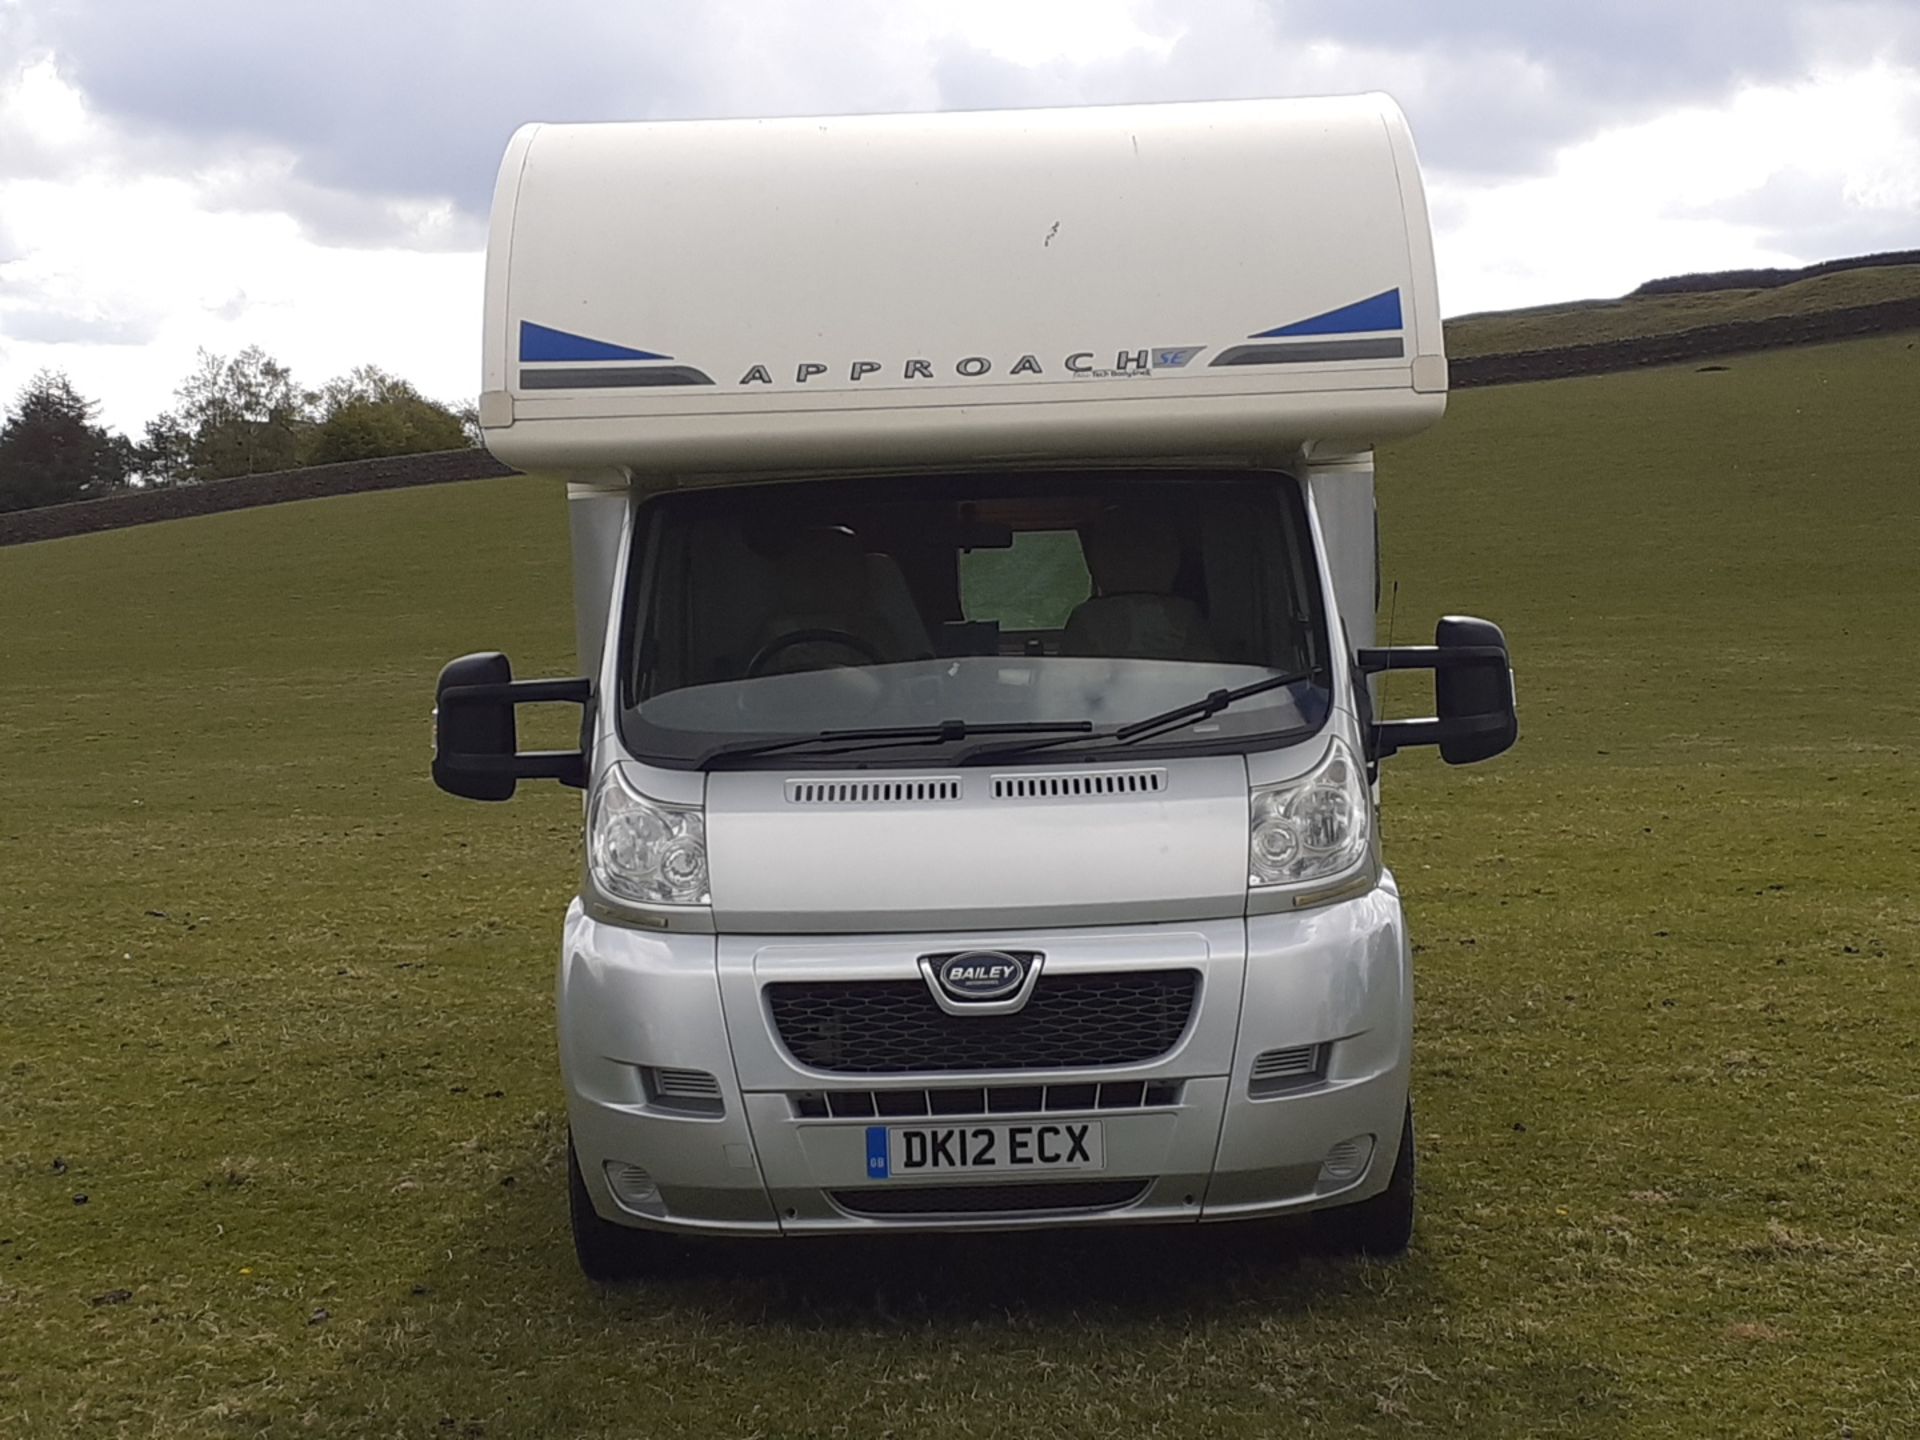 2012 BAILEY APPROACH 760 SE LUXURY 6 BERTH MOTORHOME £10K OF EXTRAS, 30,000 MILES FROM NEW - Image 3 of 31